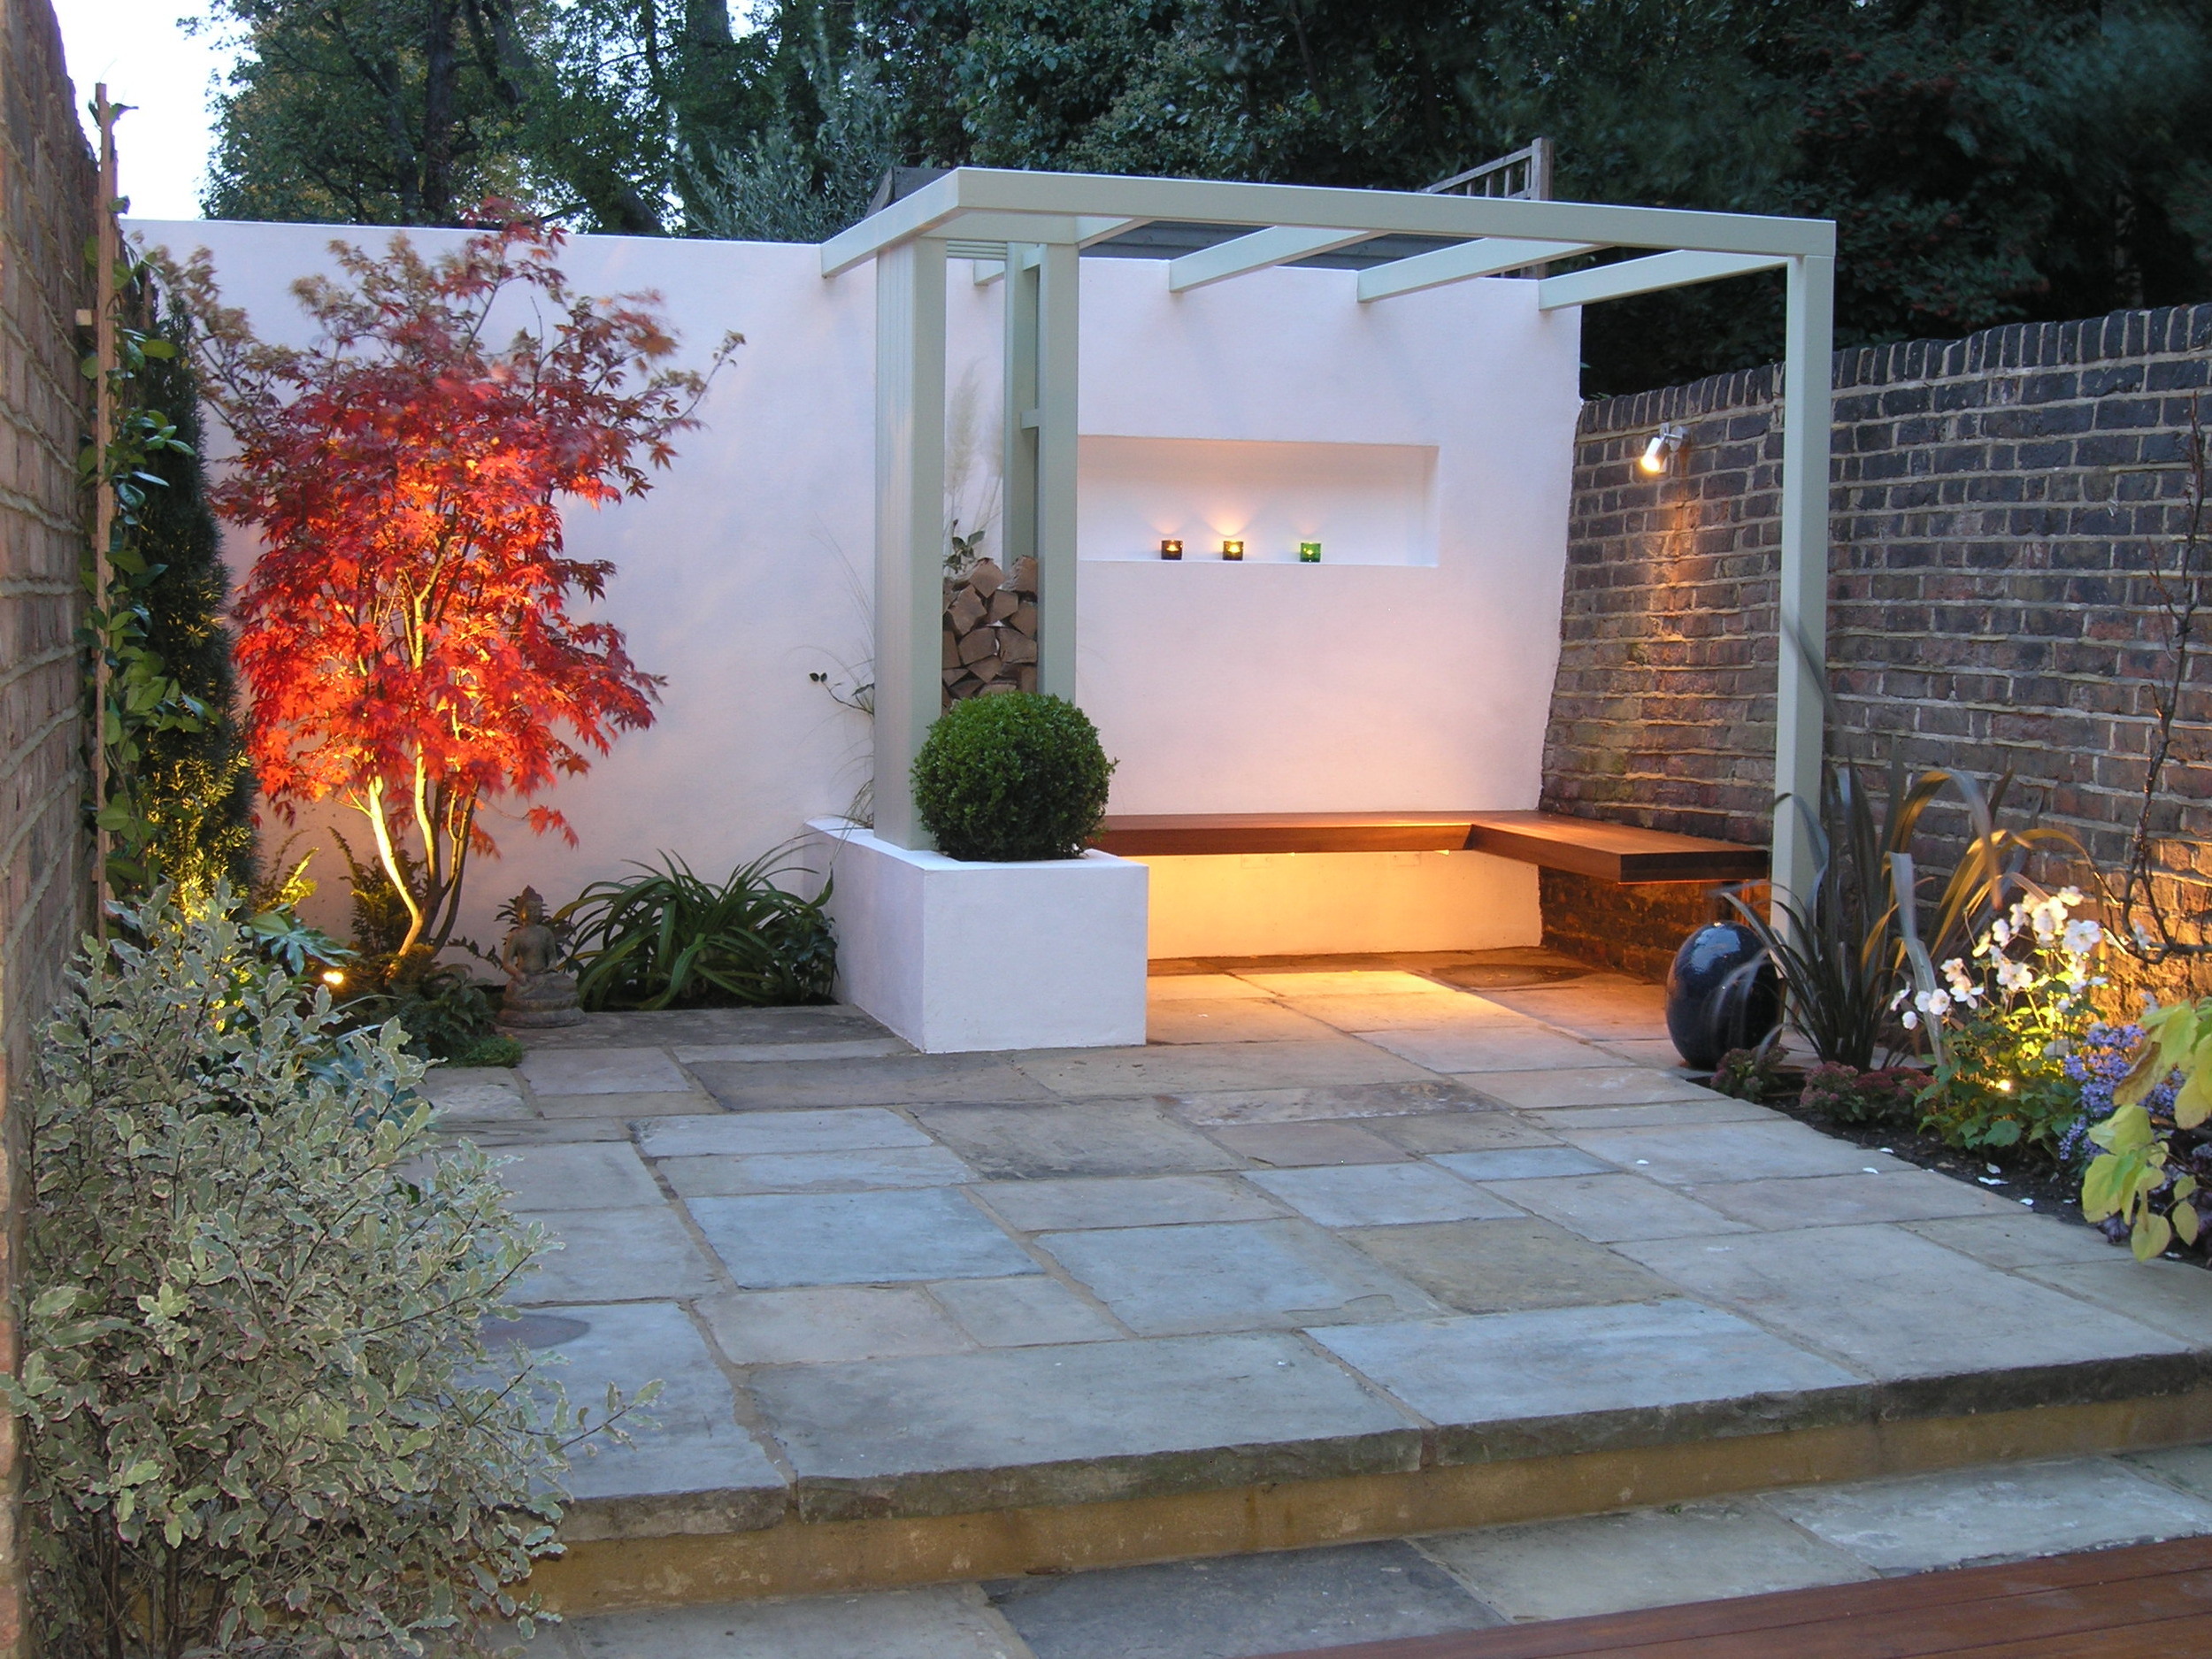 North London town garden with Yorkstone and uplighting